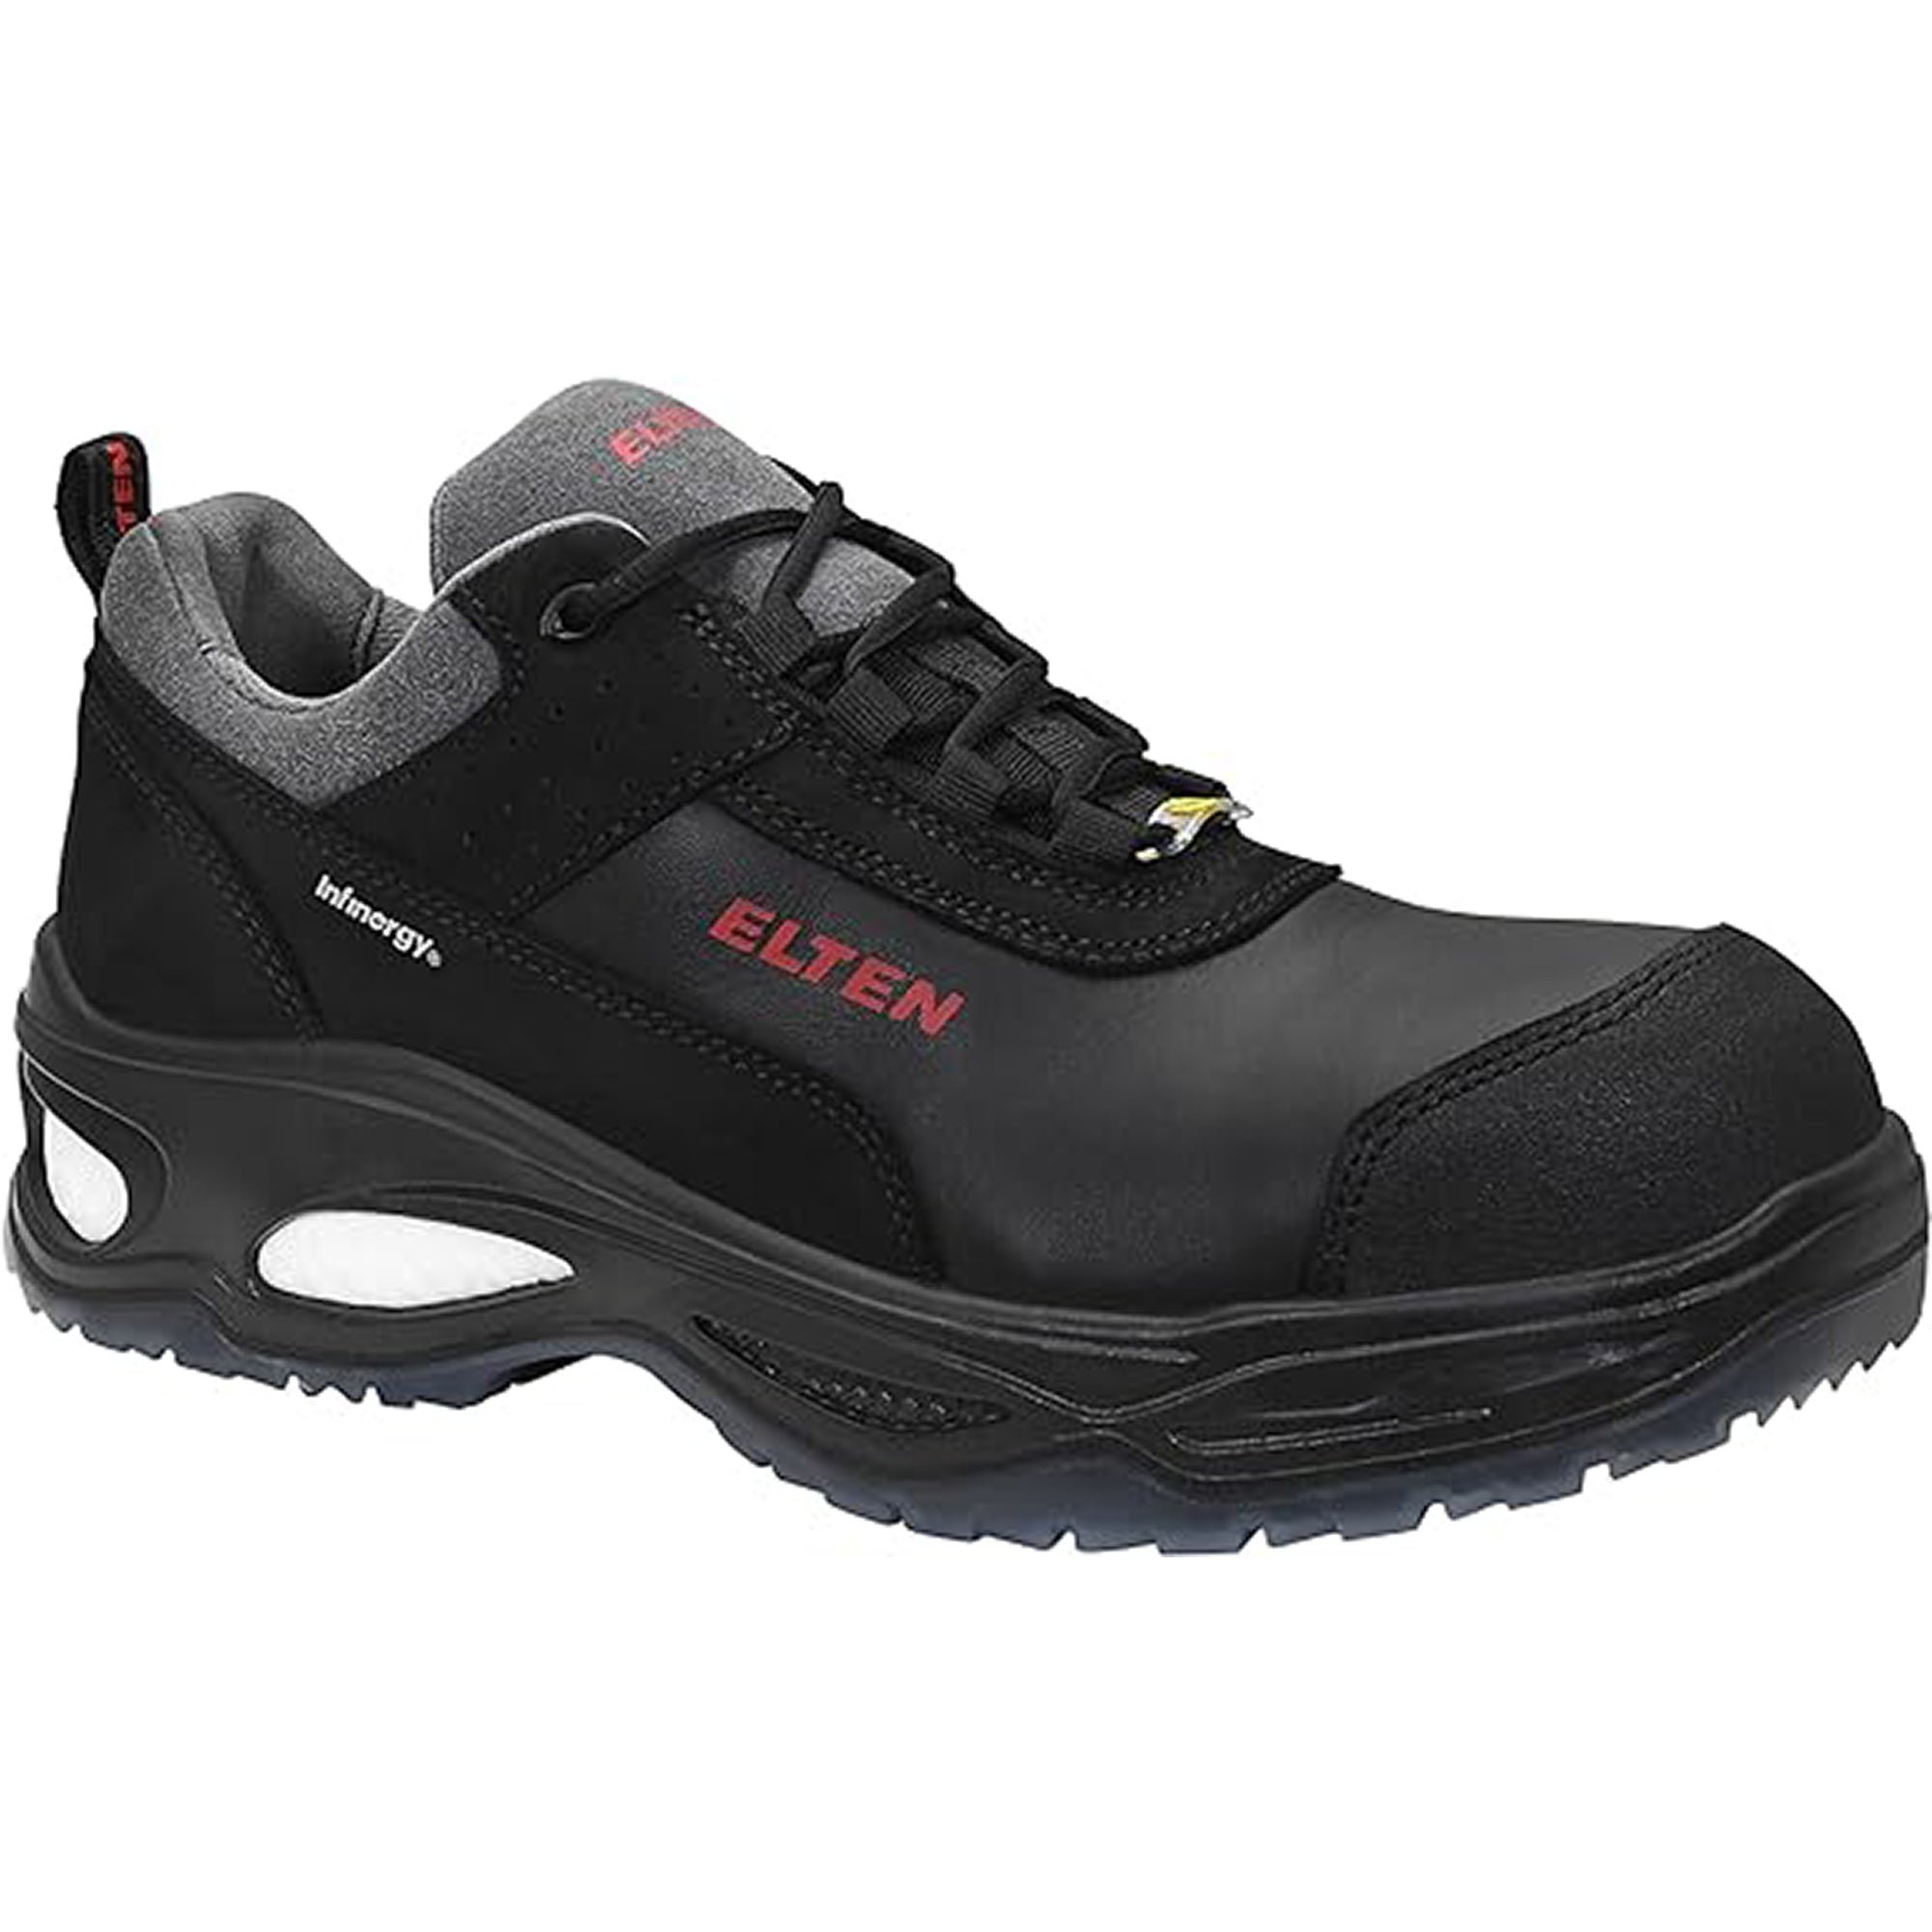 ELTEN  MILES Low ESD S3 Toe Cap Black Leather Steel  Safety work boots shoes